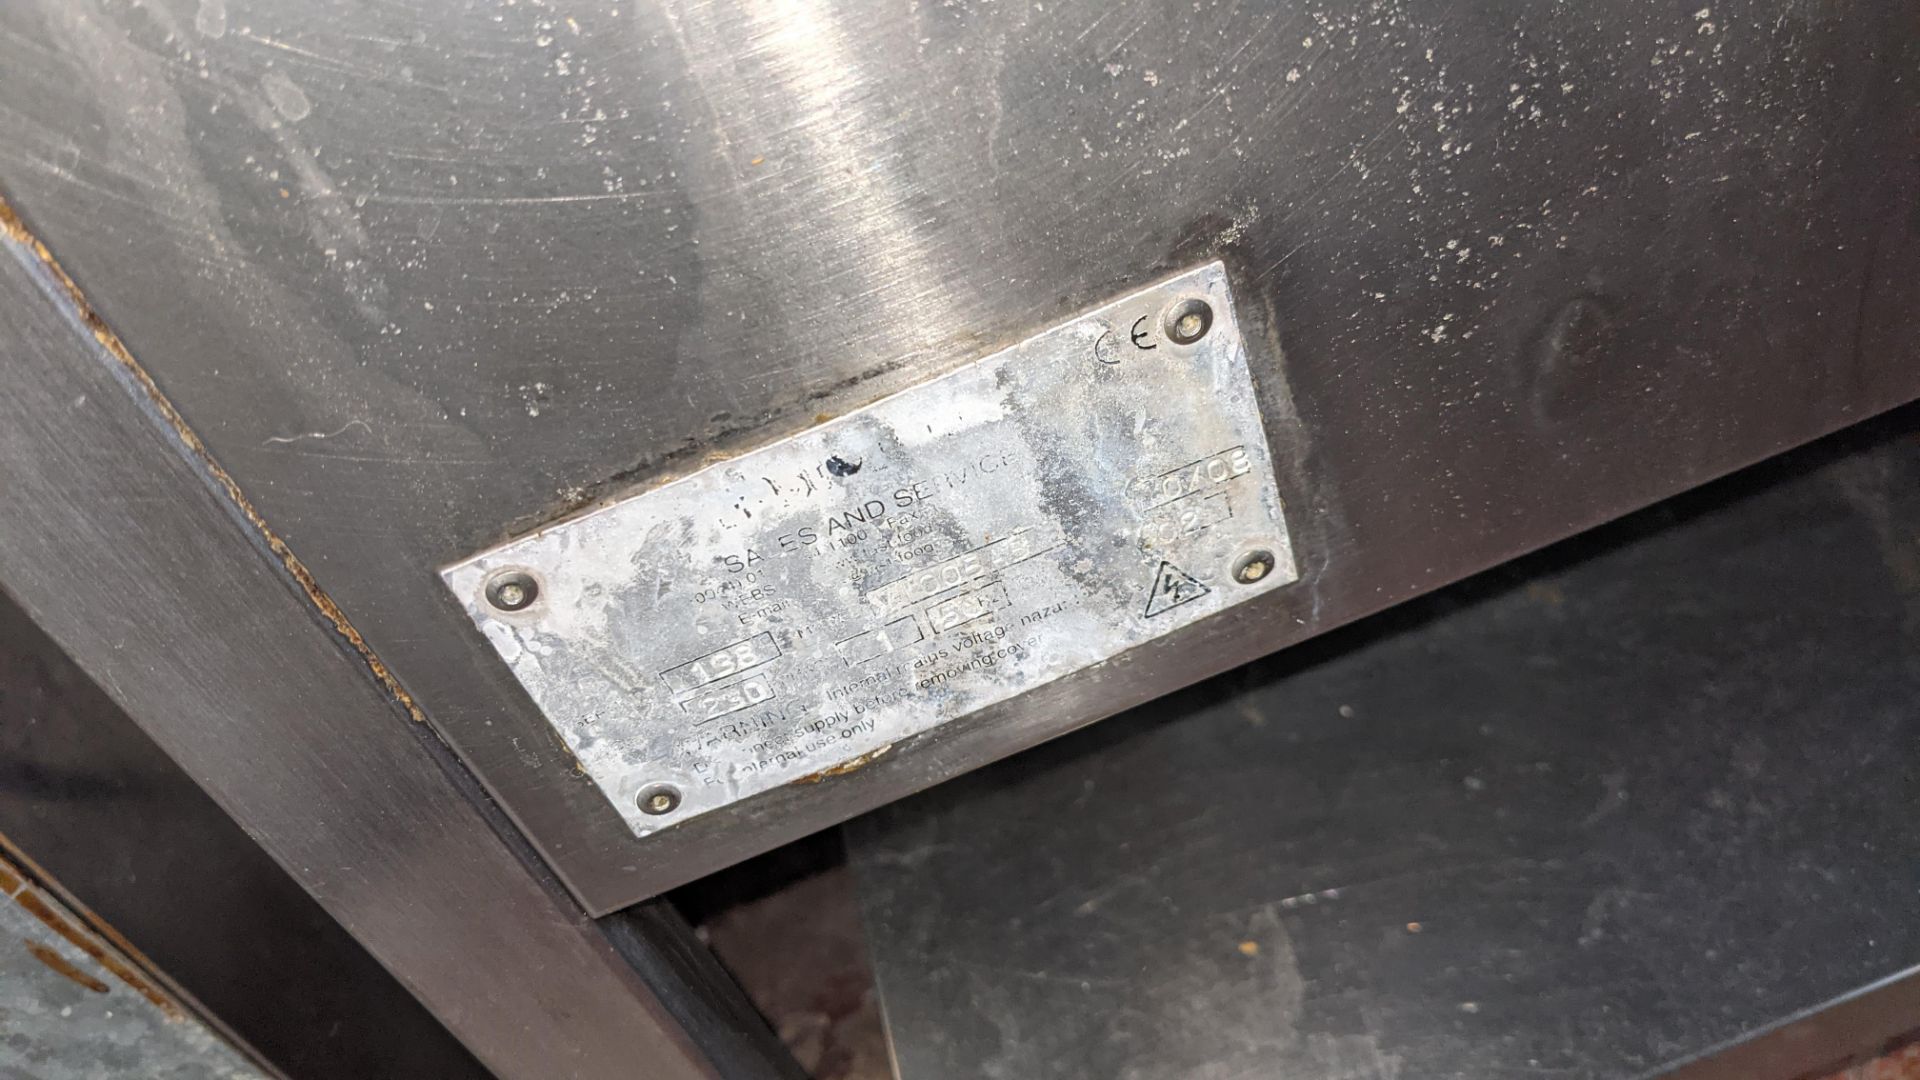 Vizu stainless steel breading table (chicken) - tray missing - Image 5 of 9